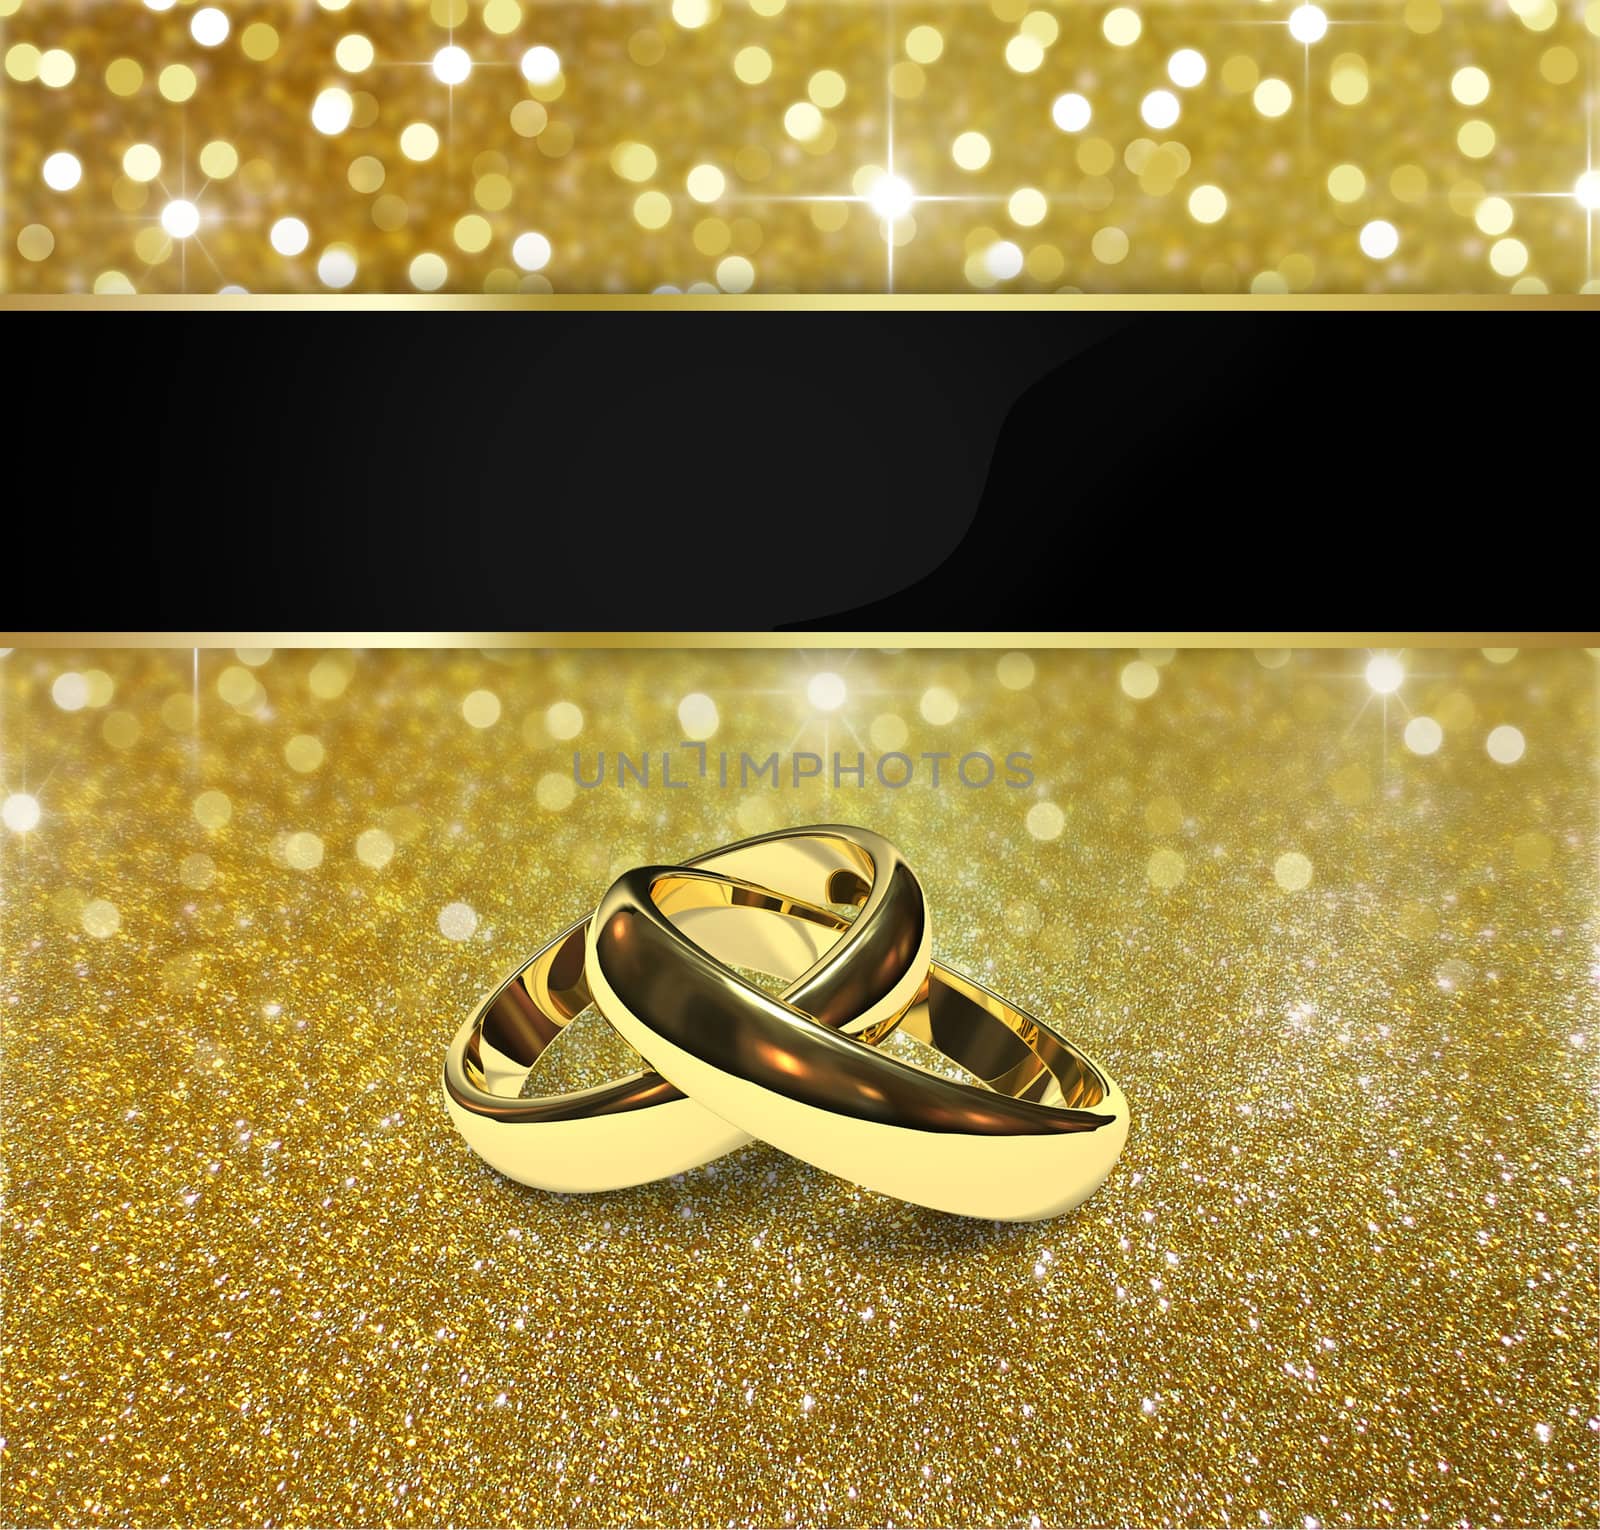 Elegant and luxurious gold design illustration: 2 golden wedding rings on a gold glitter and bokeh background with sparkling 
bright stars.